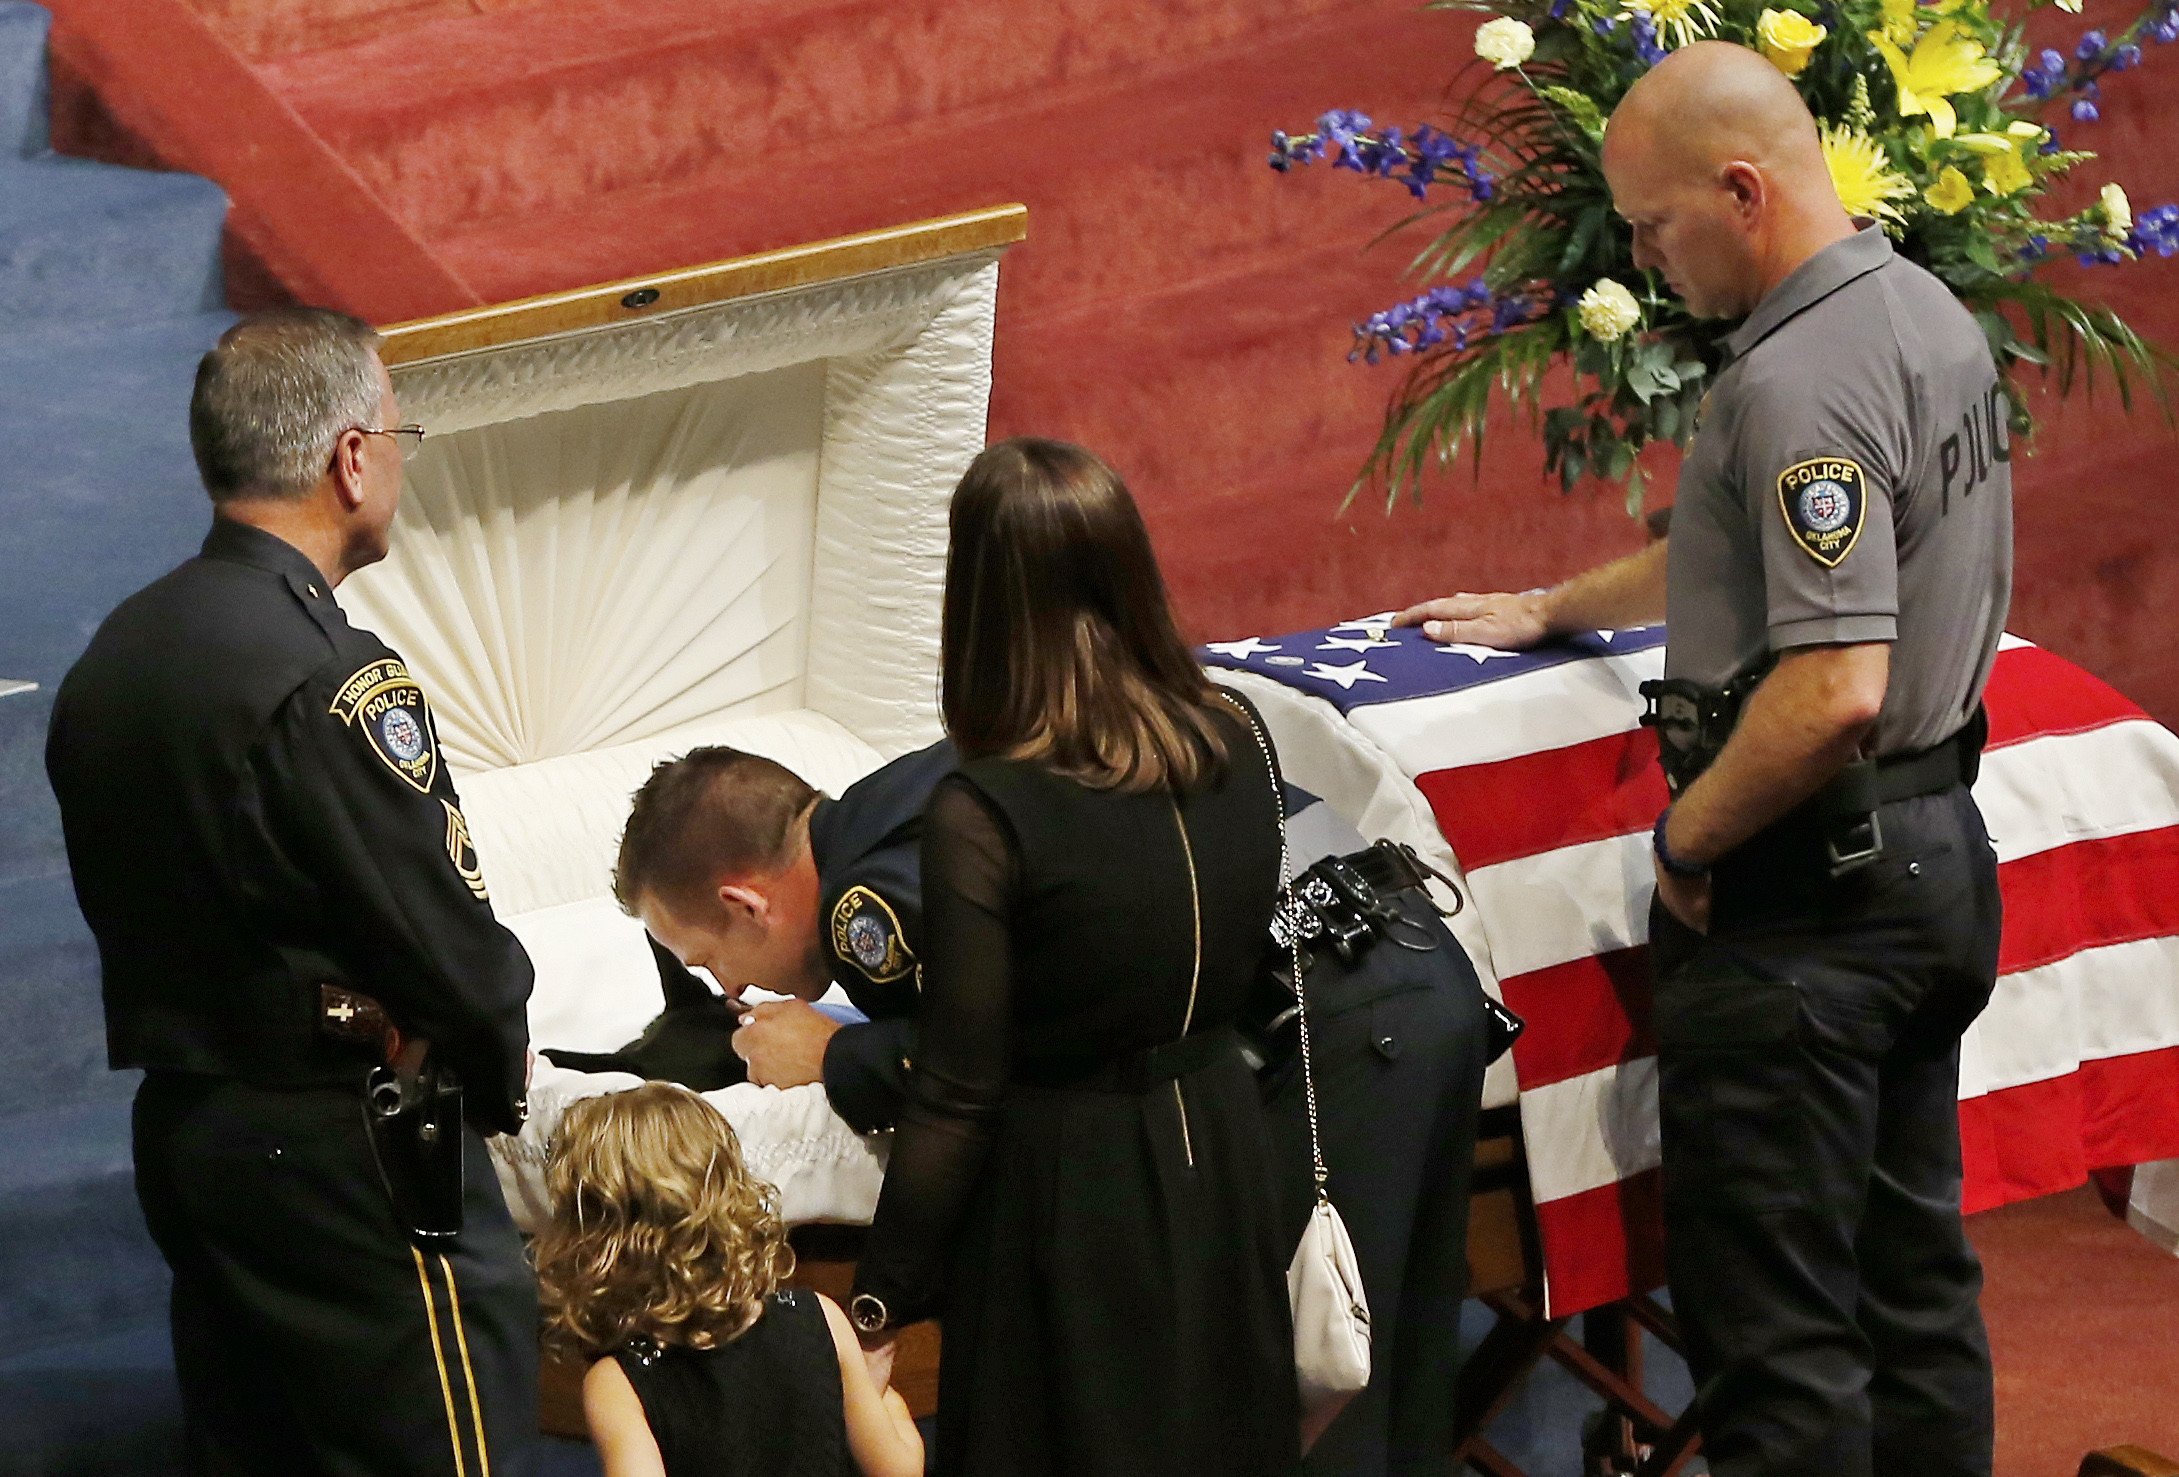 Oklahoma City police officer Sgt. Ryan Stark, center, leans over the casket of his canine partner, K-9 Kye, following funeral services for the dog in Oklahoma City, on Aug. 28, 2014. (Sue Ogrocki—AP)